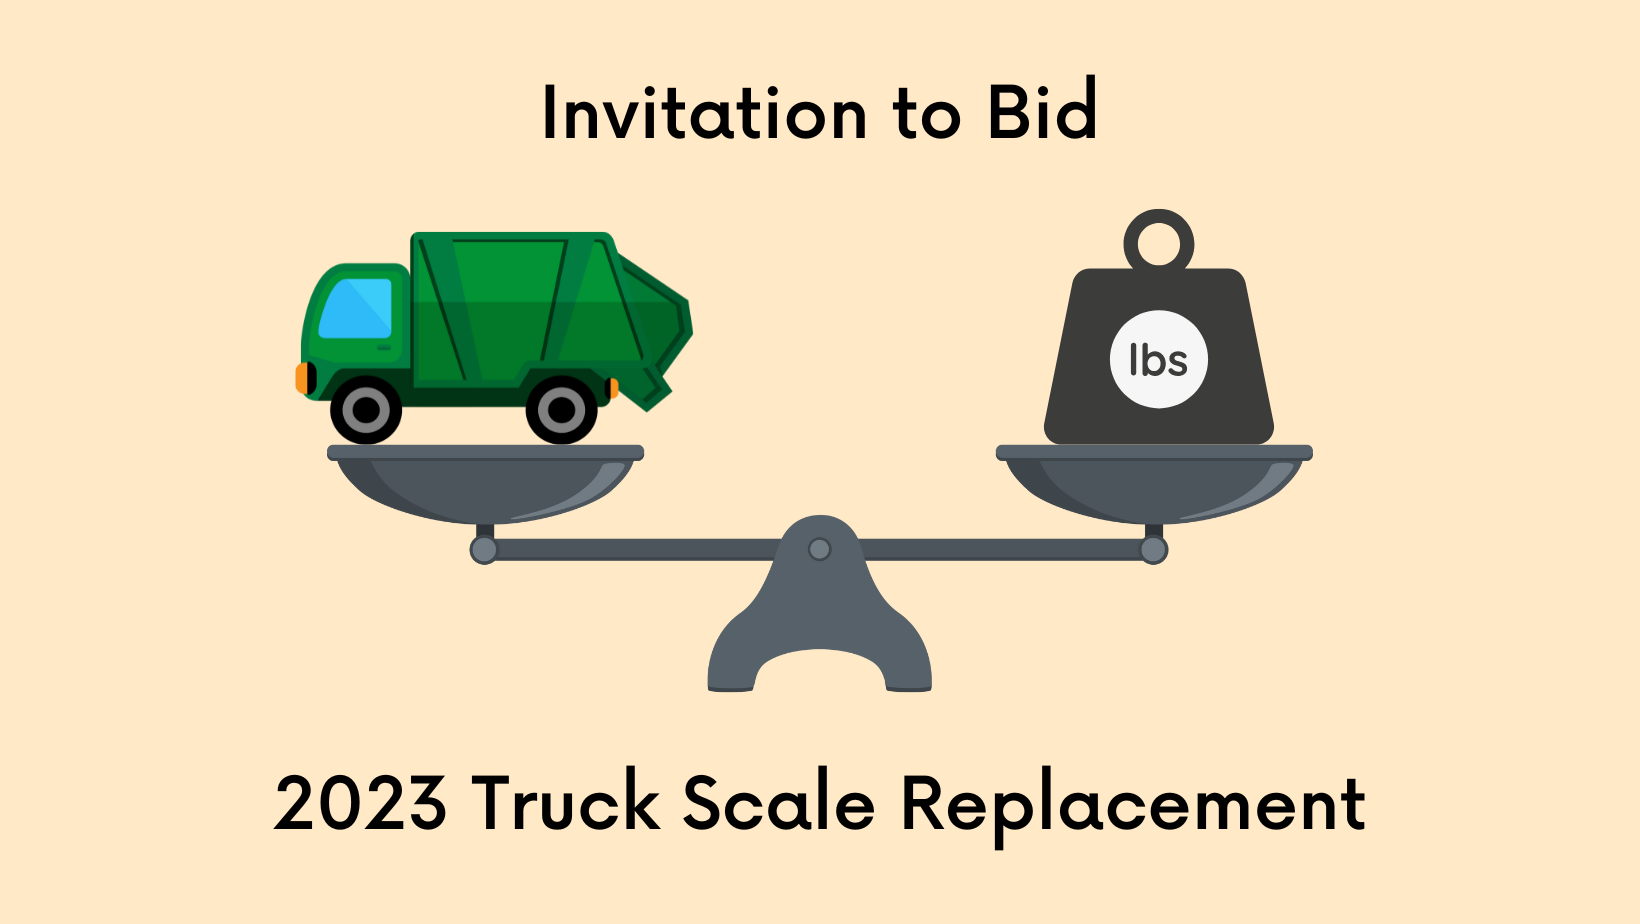 Truck Scale Replacement Bid v4